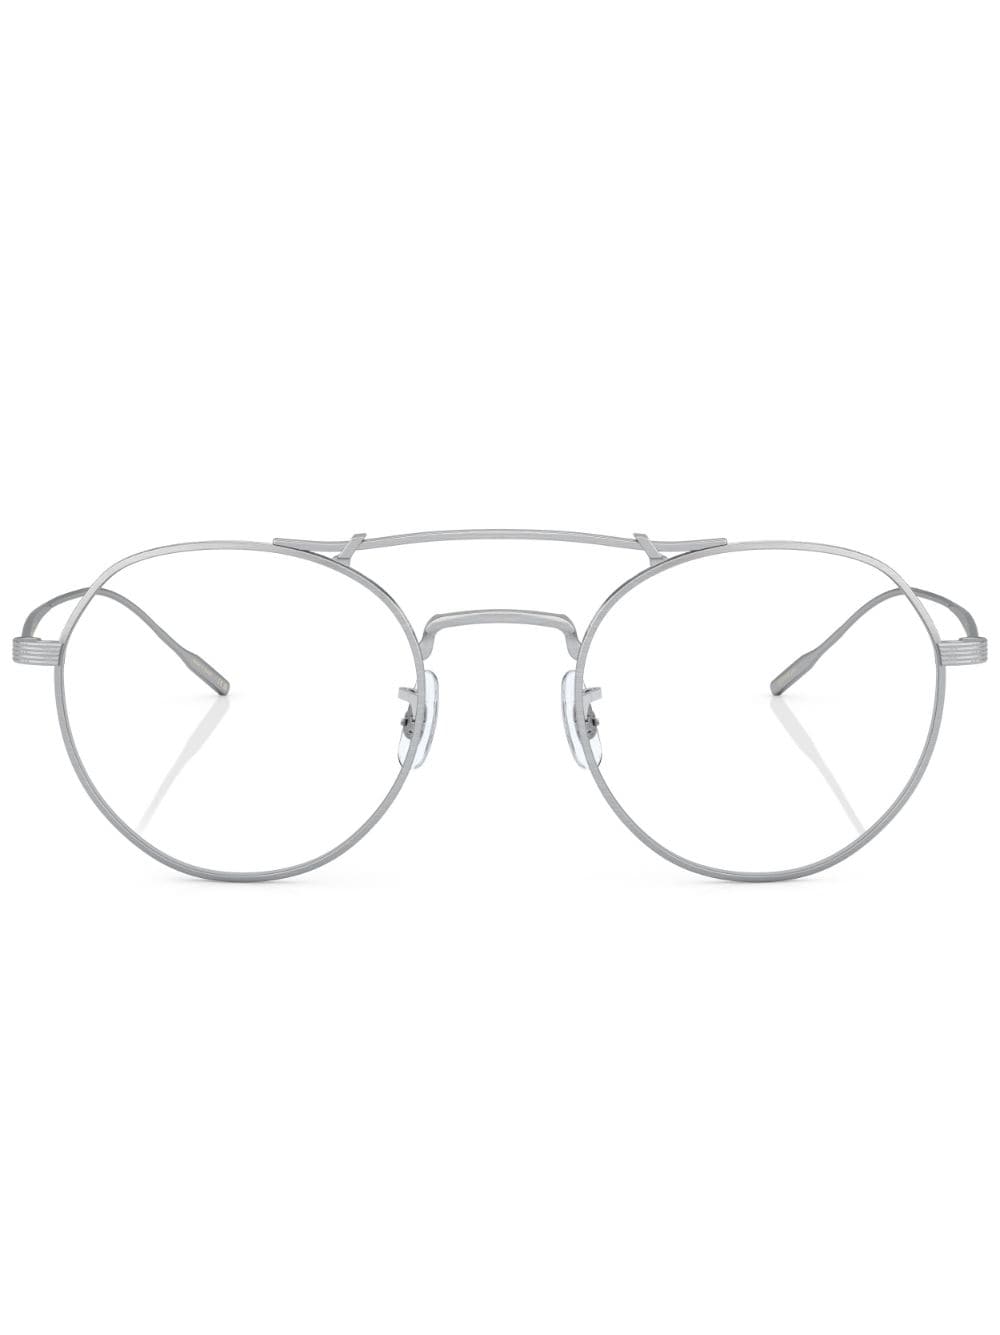 Oliver Peoples Reymont Round-frame Glasses In 5254sb Brushed Silver